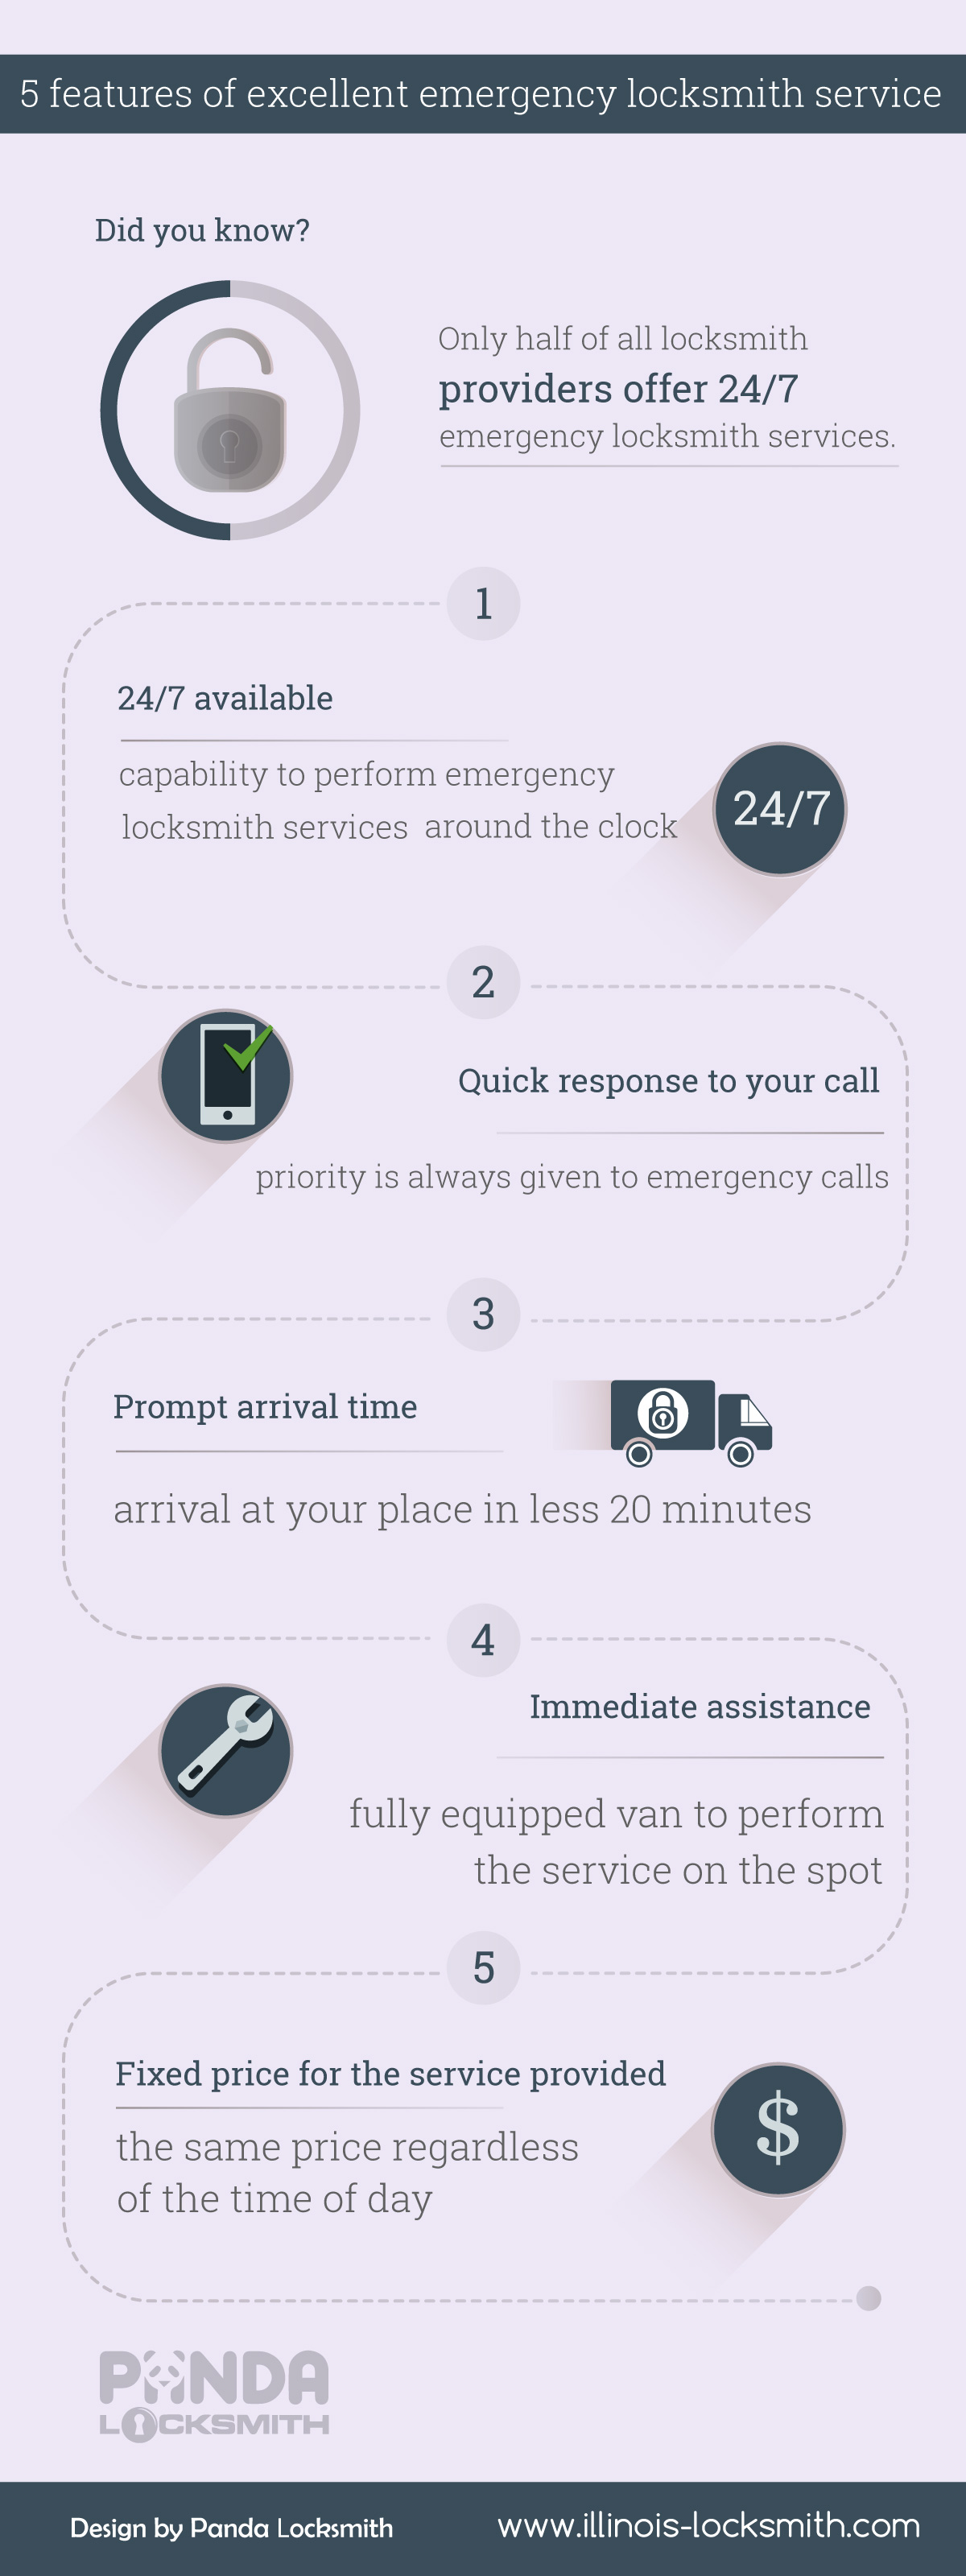 5 features of excellent emergency locksmith service - Locksmith Infographic